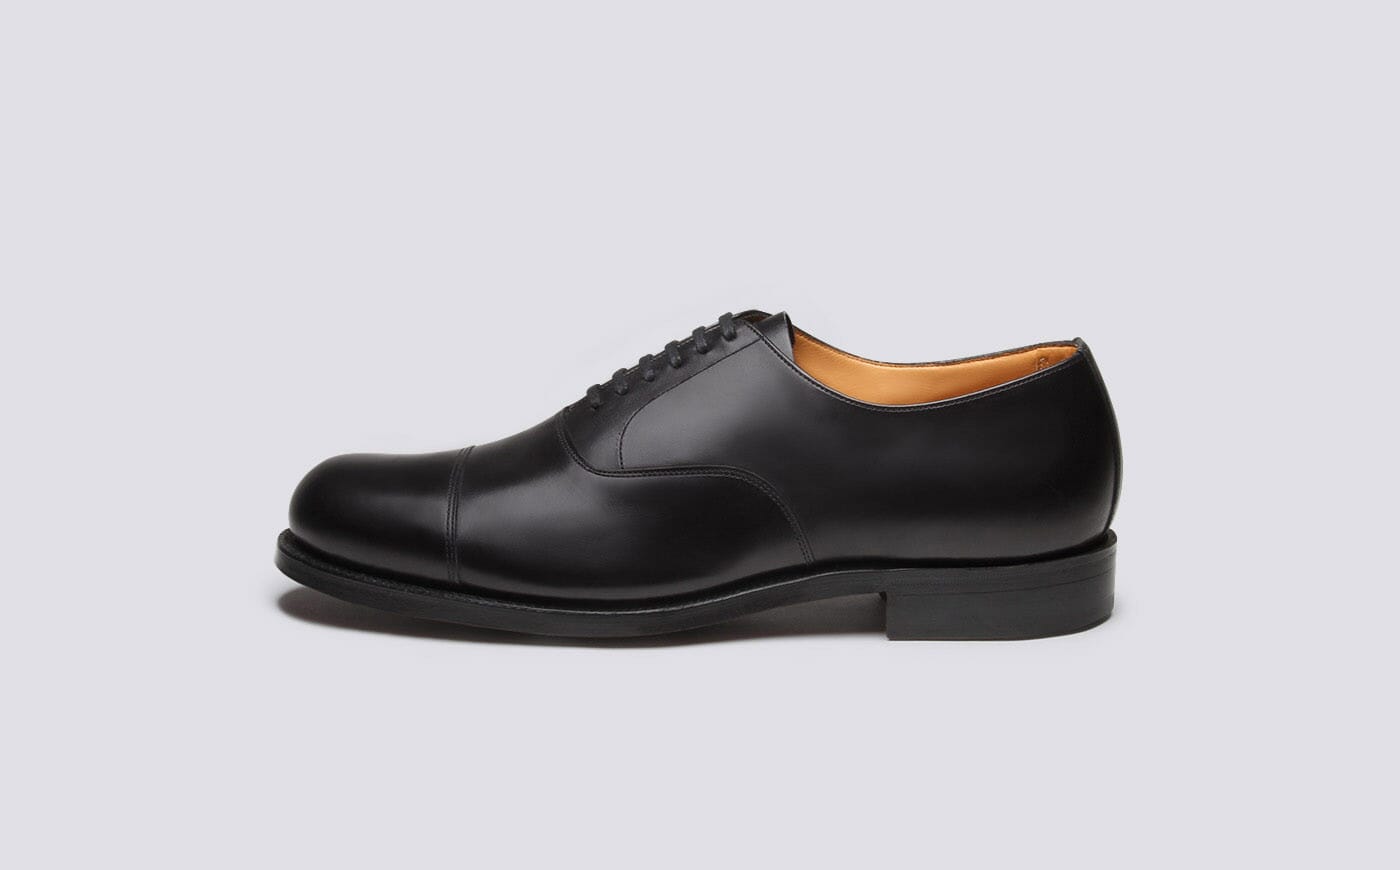 Shoe No.2 | Mens Oxford shoe in Black Calf Leather on a Leather